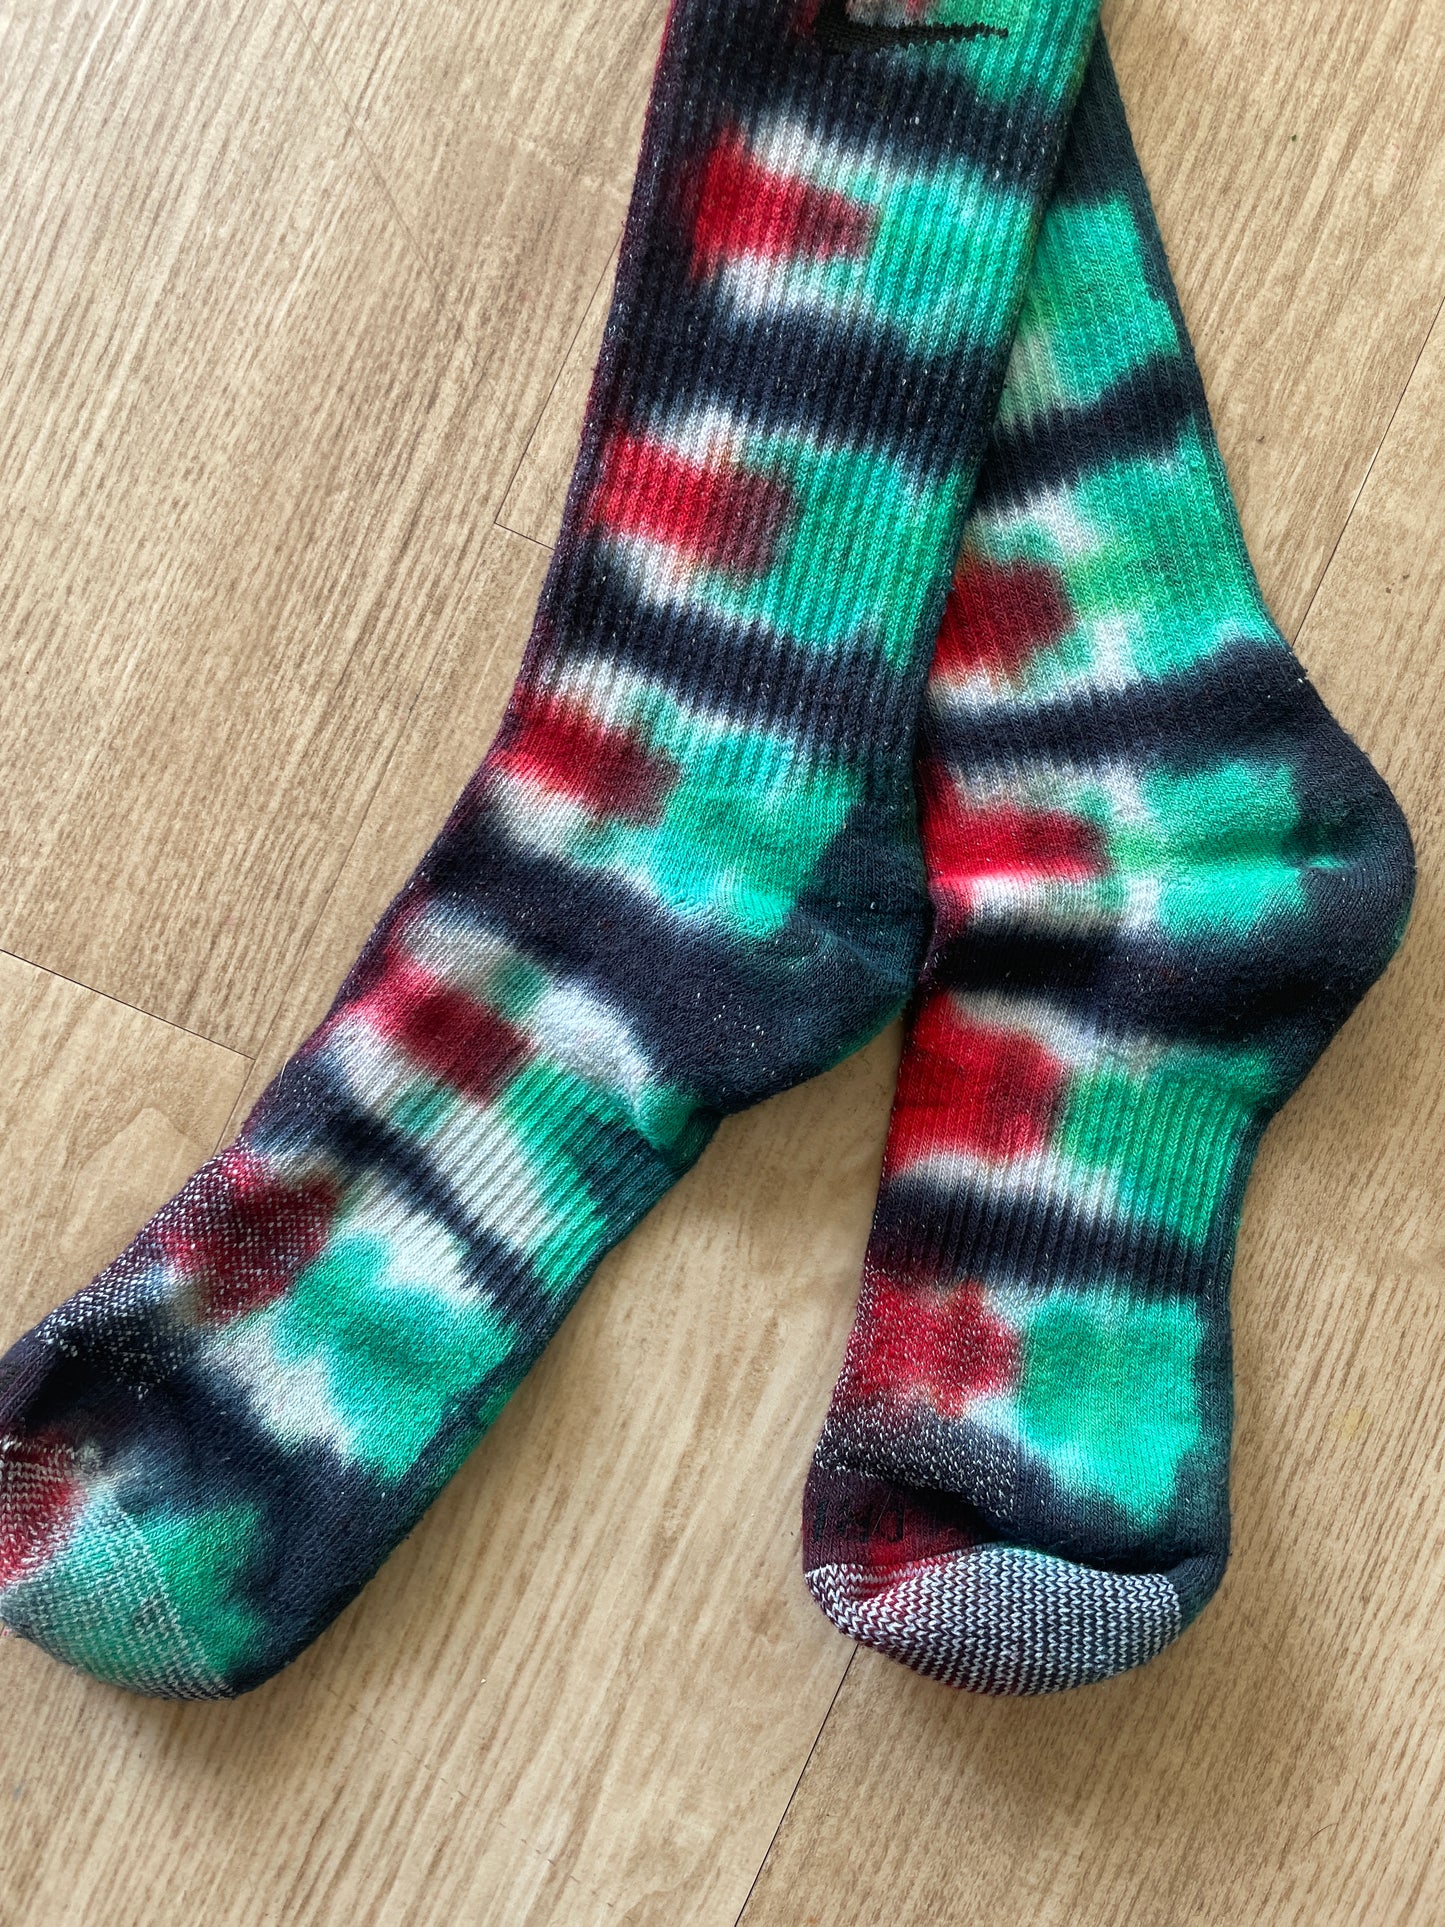 NIKE Christmas Socks Hand Tie Dyed Red, Green, and Black Nike Dri-FIT Everyday Plus Crew Training Socks - Size Large (Men's 8-12/Women's 10-13)